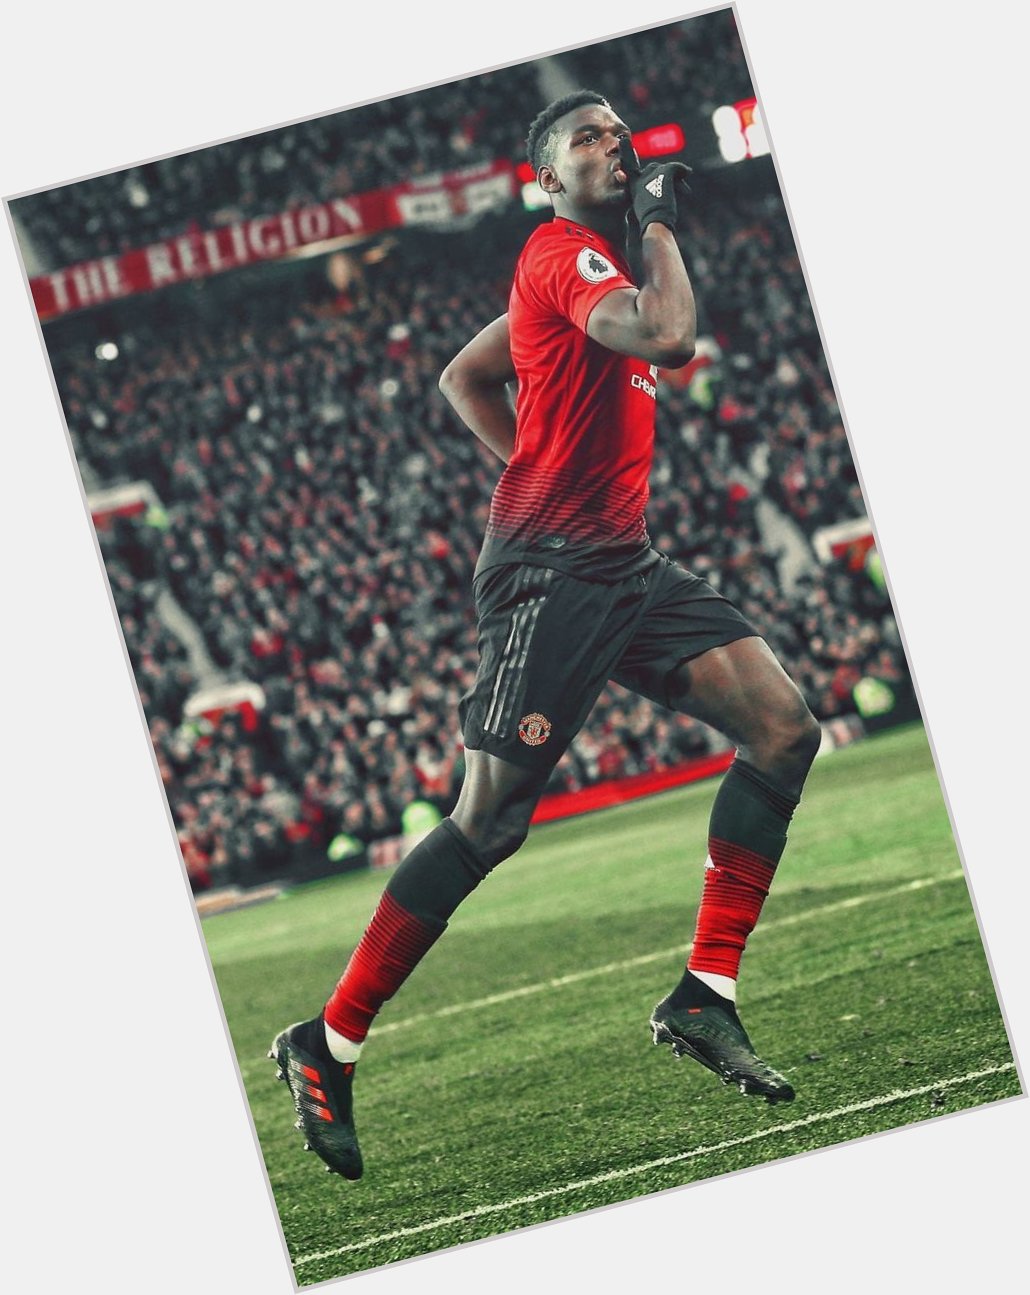 Happy 26th birthday to the one and only Paul Pogba 